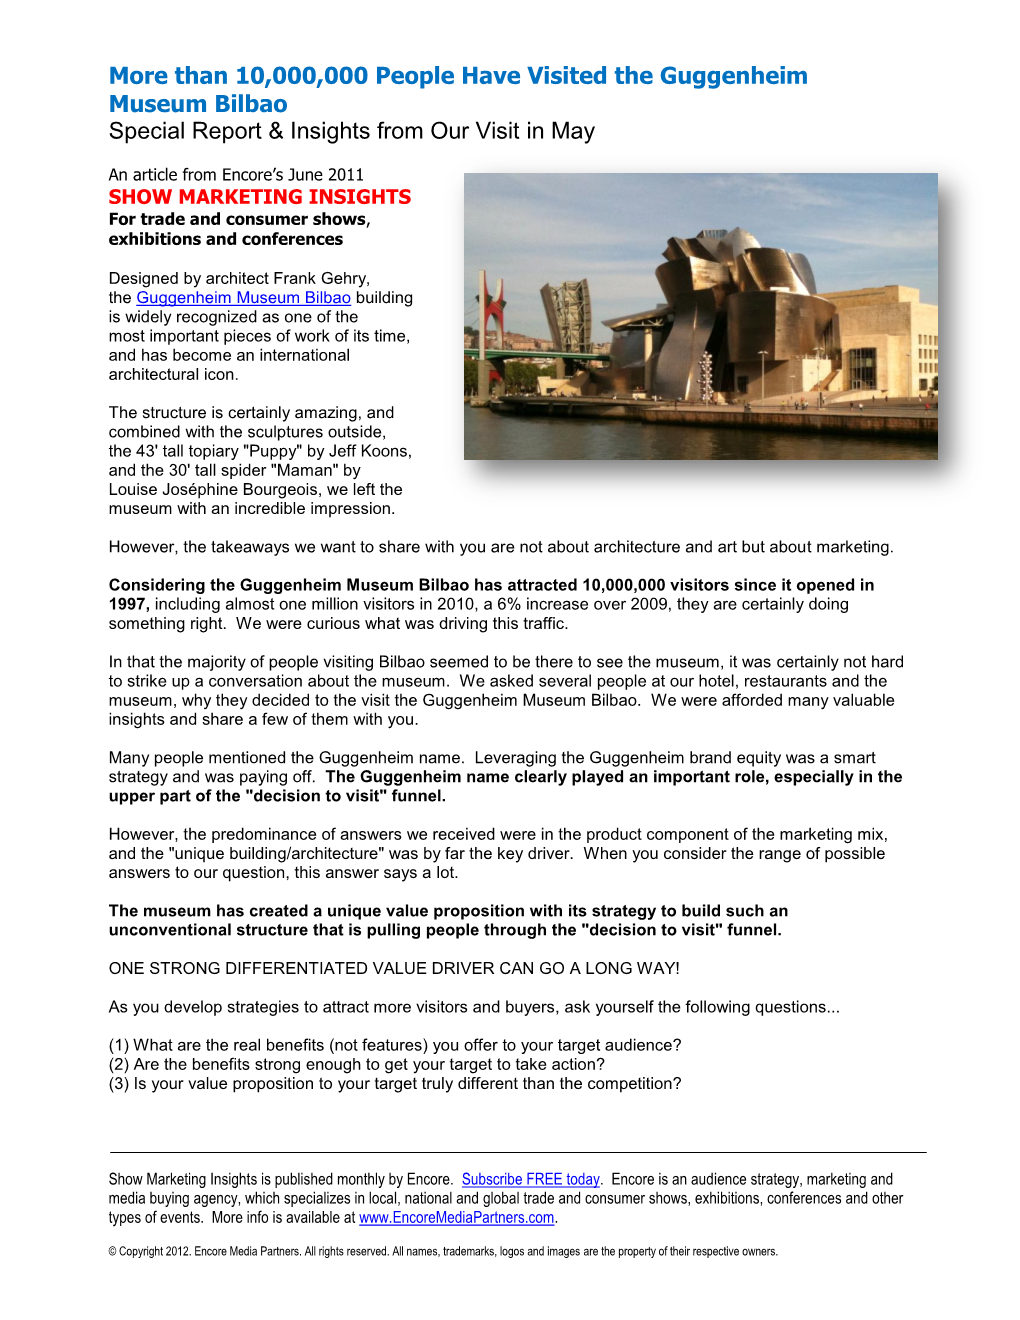 More Than 10,000,000 People Have Visited the Guggenheim Museum Bilbao Special Report & Insights from Our Visit in May